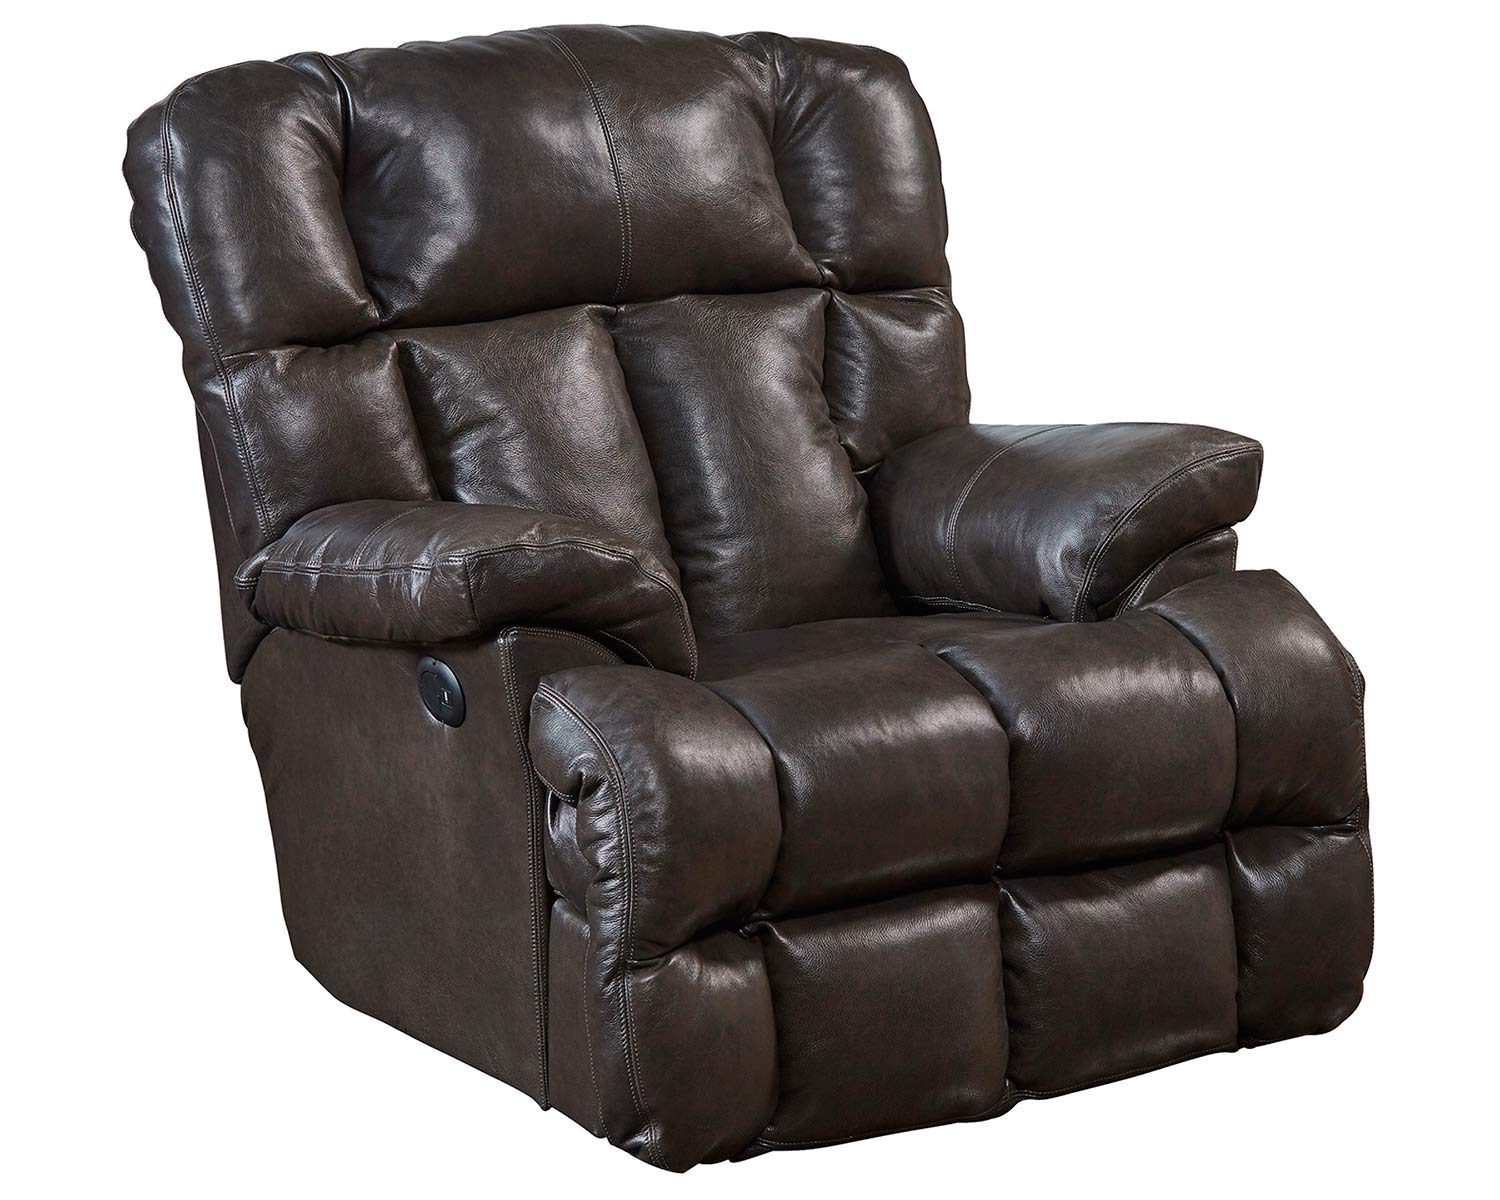 CatNapper Victor Leather Rocker Recliner Chair - Chocolate